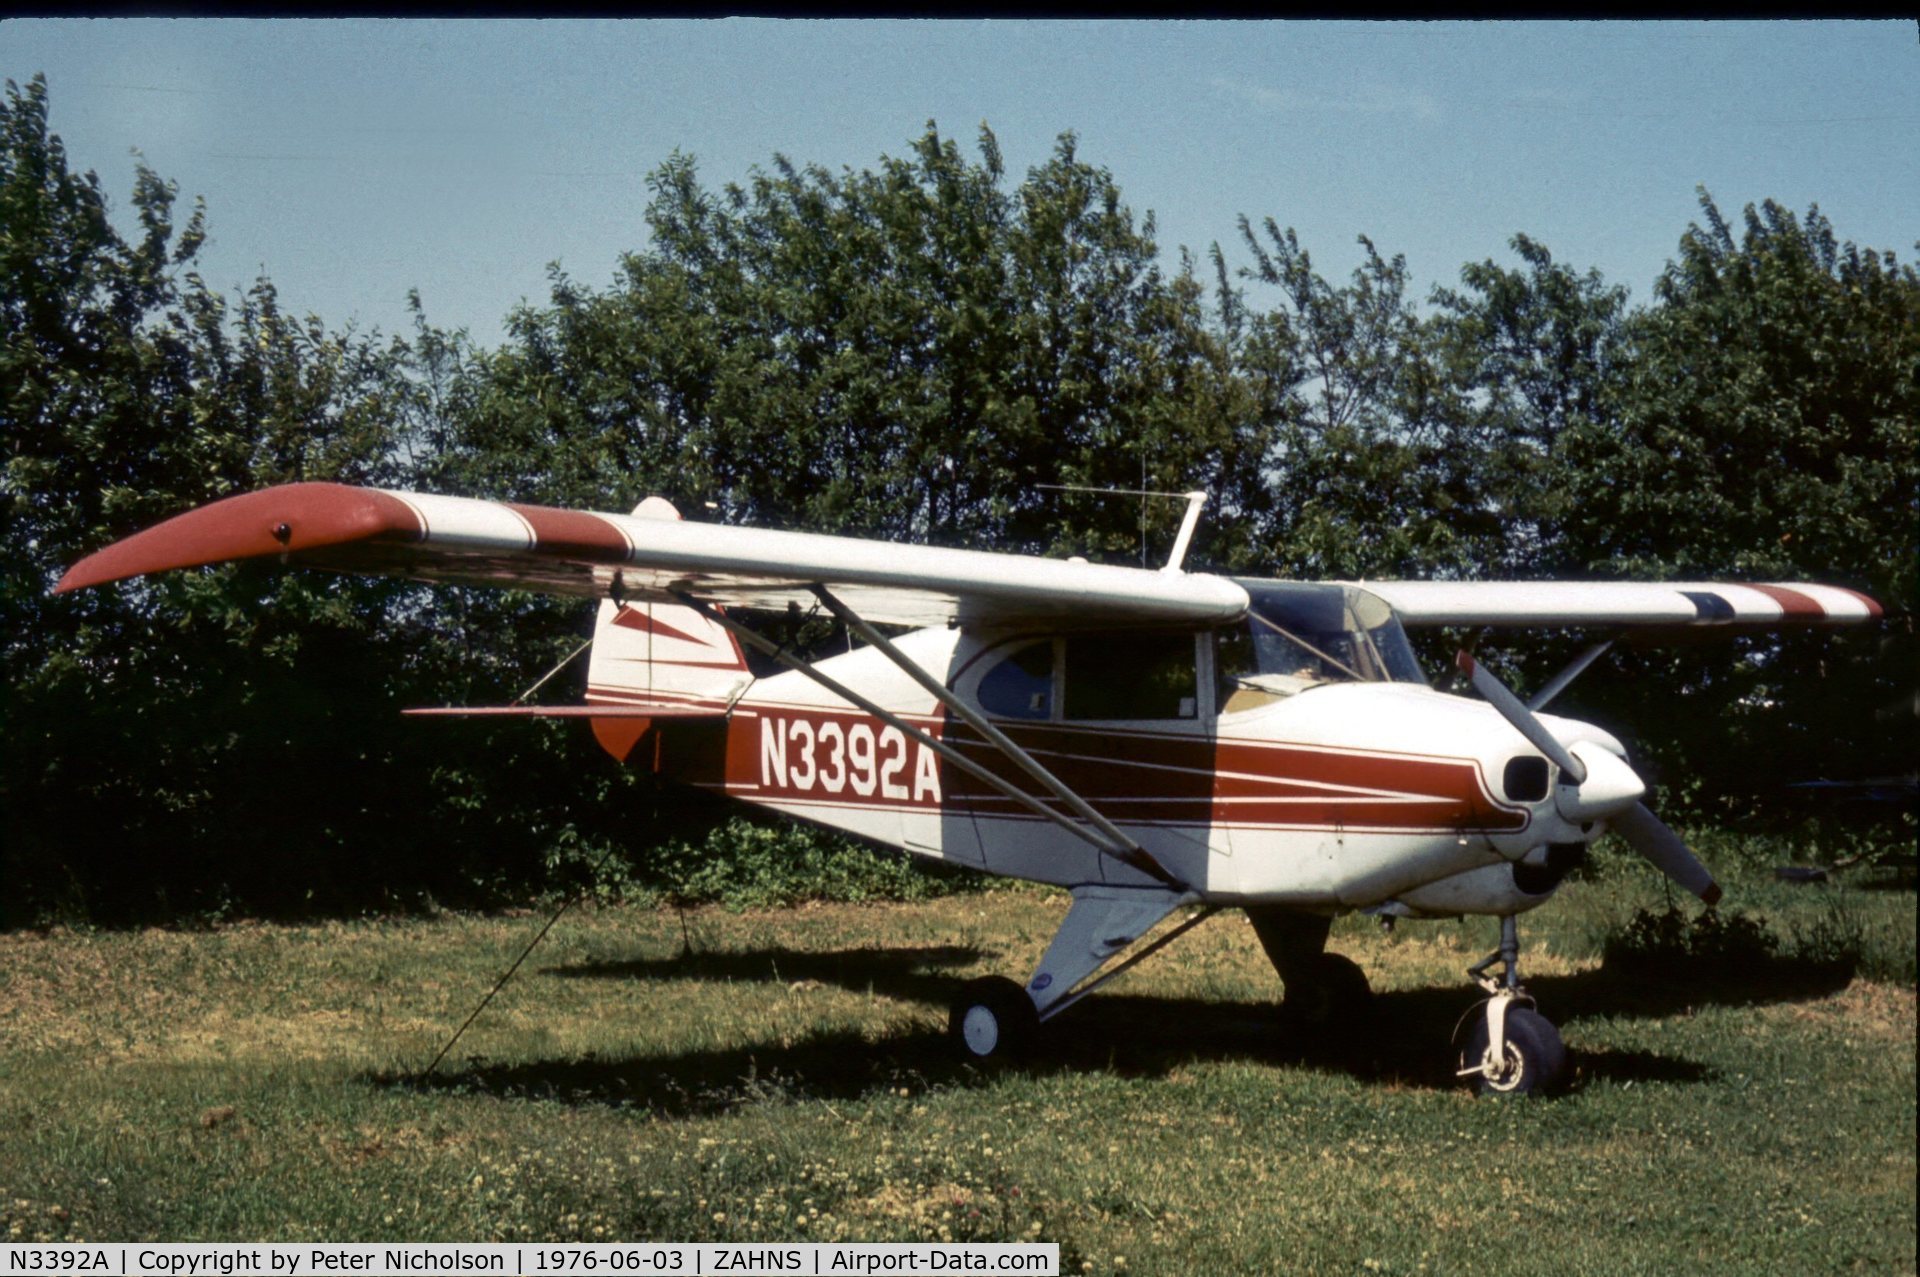 N3392A, Piper PA-22-135 Tri-Pacer C/N 22-1652, Seen in 1975 and 1976 at Zahns Airfield, Amityville, Long Island - closed in 1980